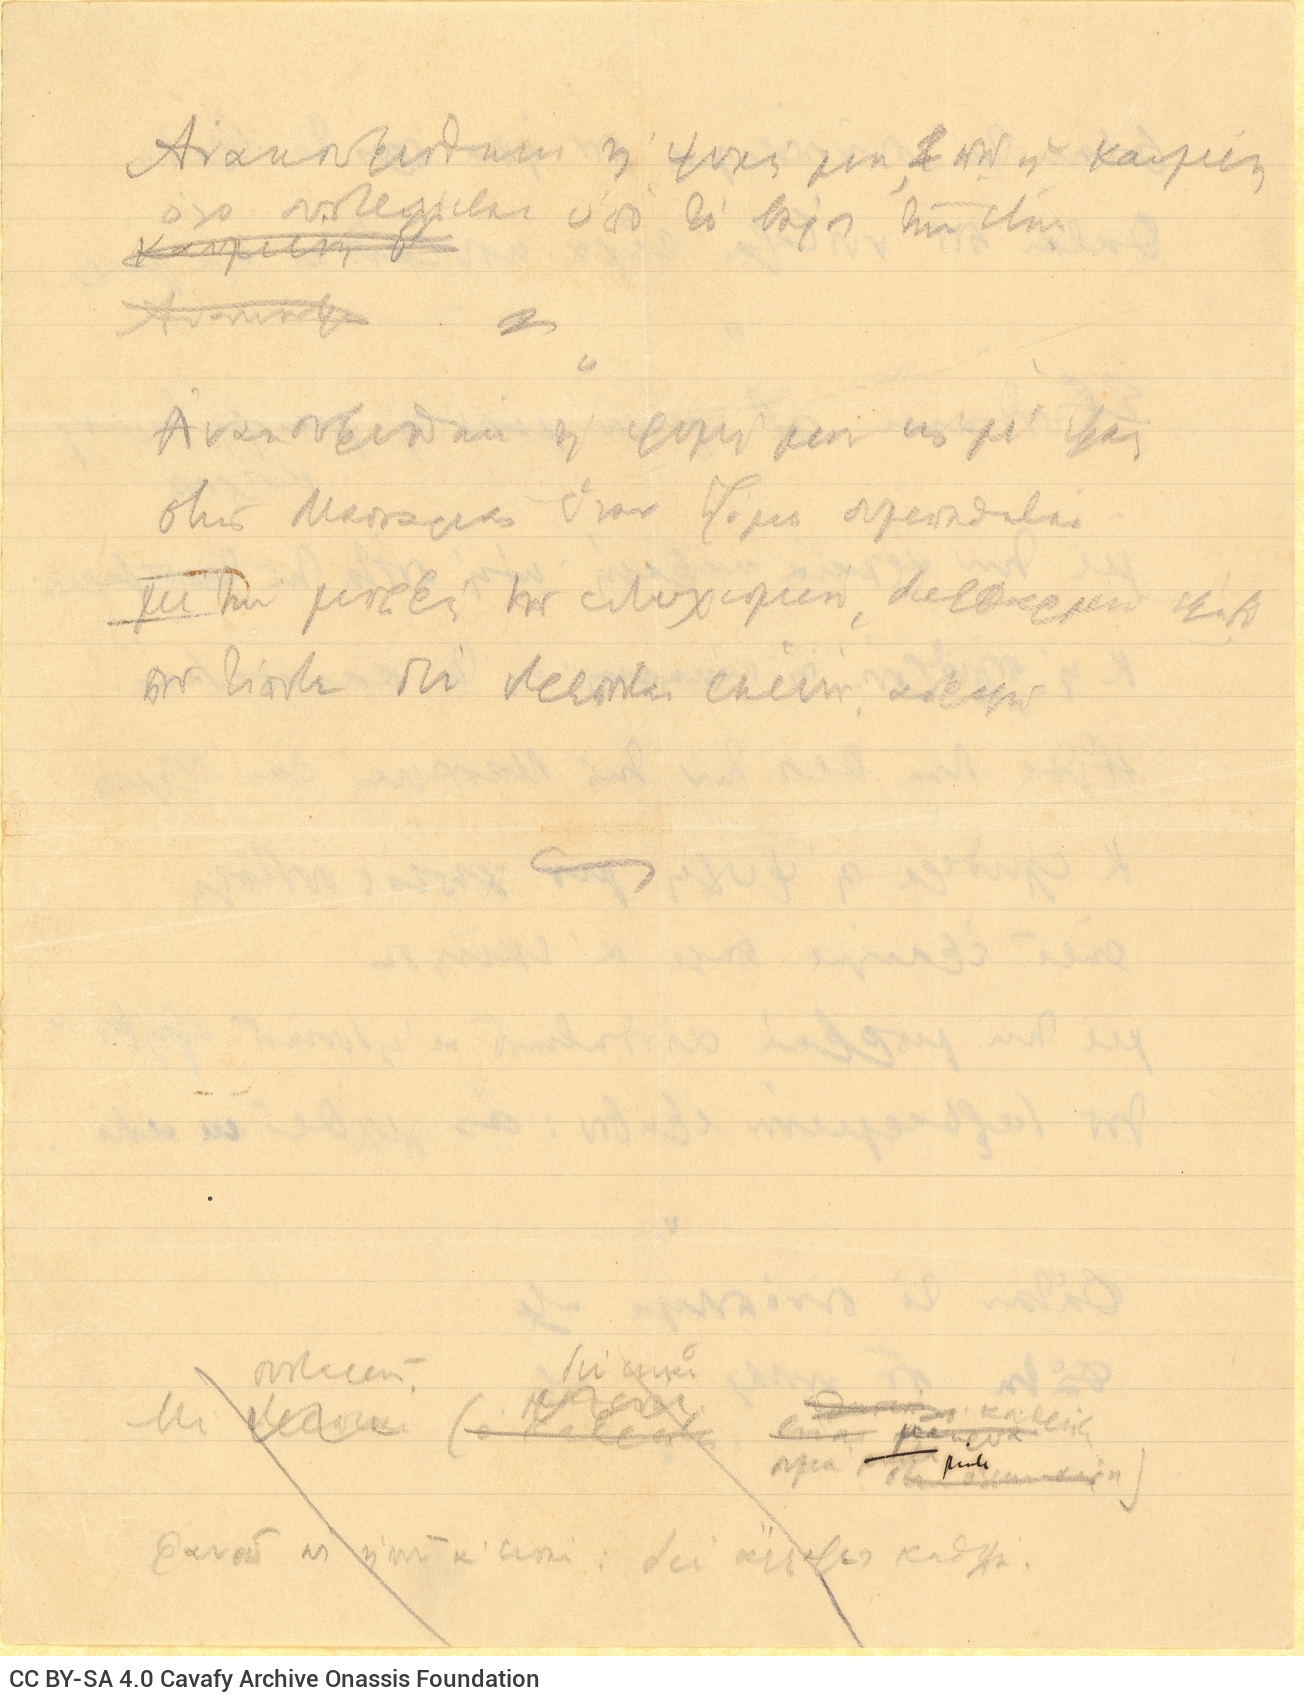 Handwritten drafts of the poem "It Must Have Been the Spirits" on the first and last pages of a ruled double sheet notepap